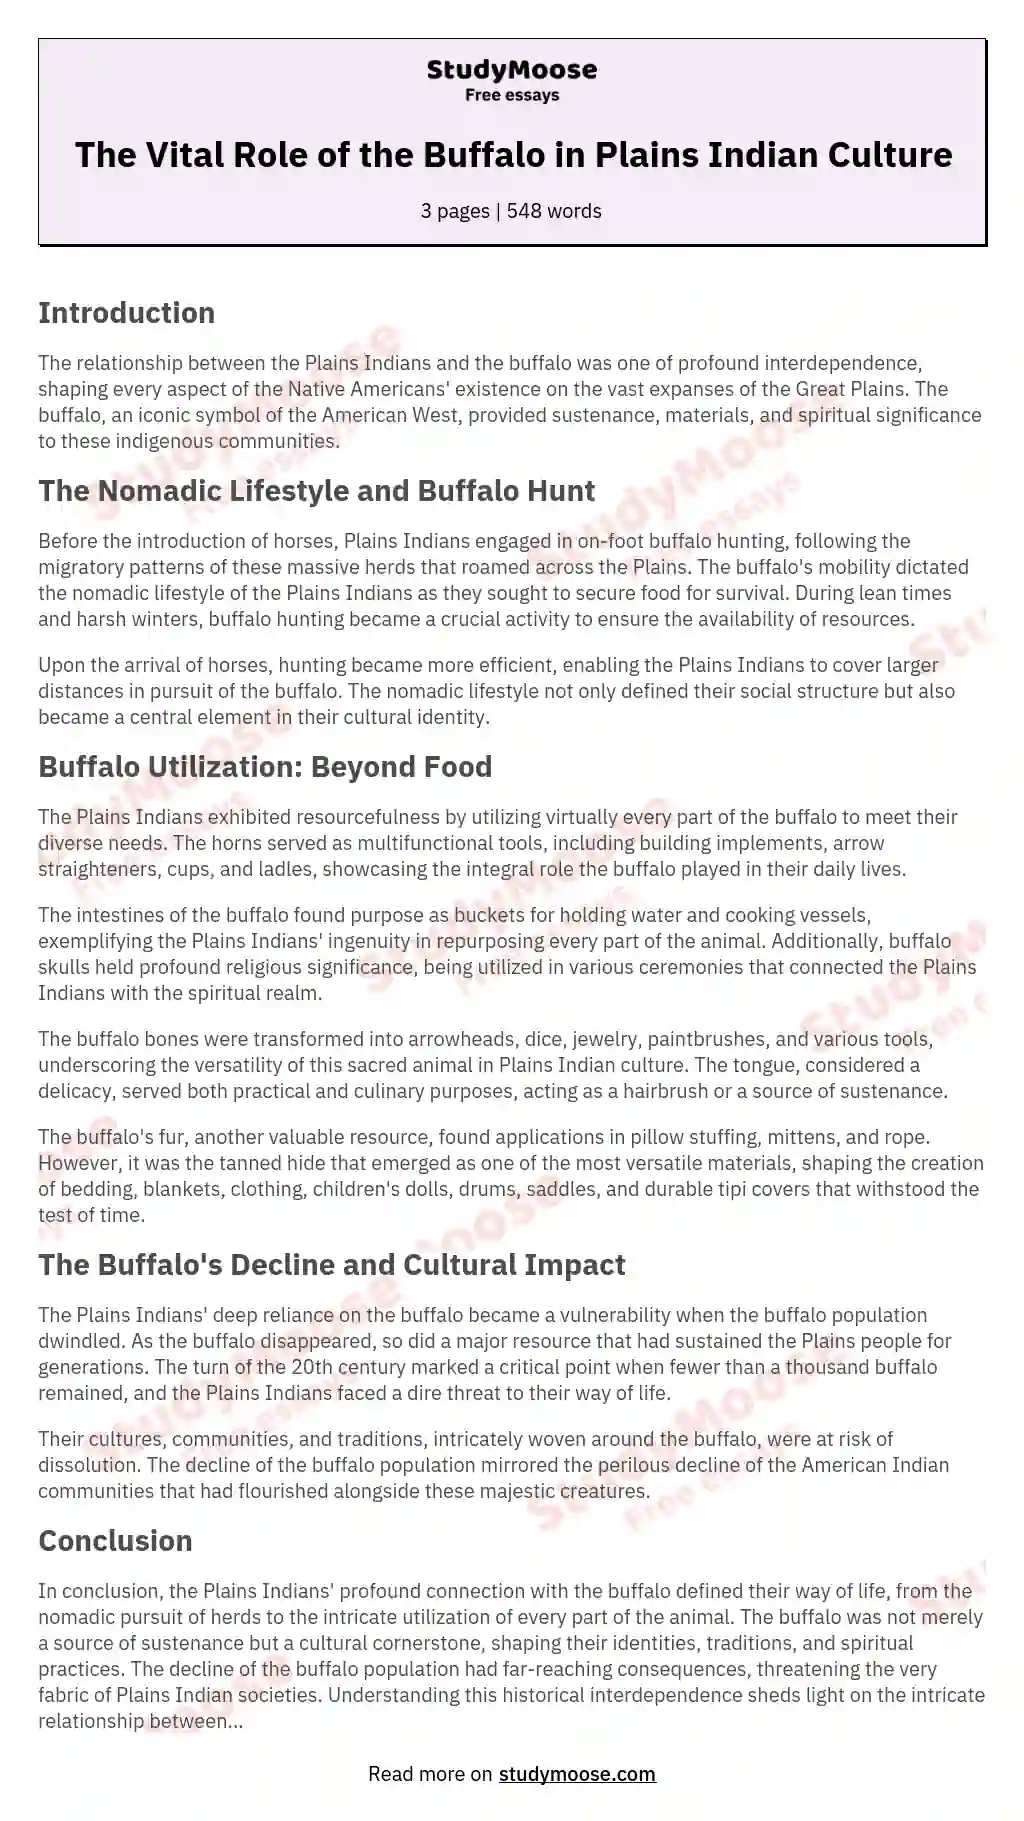 The Vital Role of the Buffalo in Plains Indian Culture essay